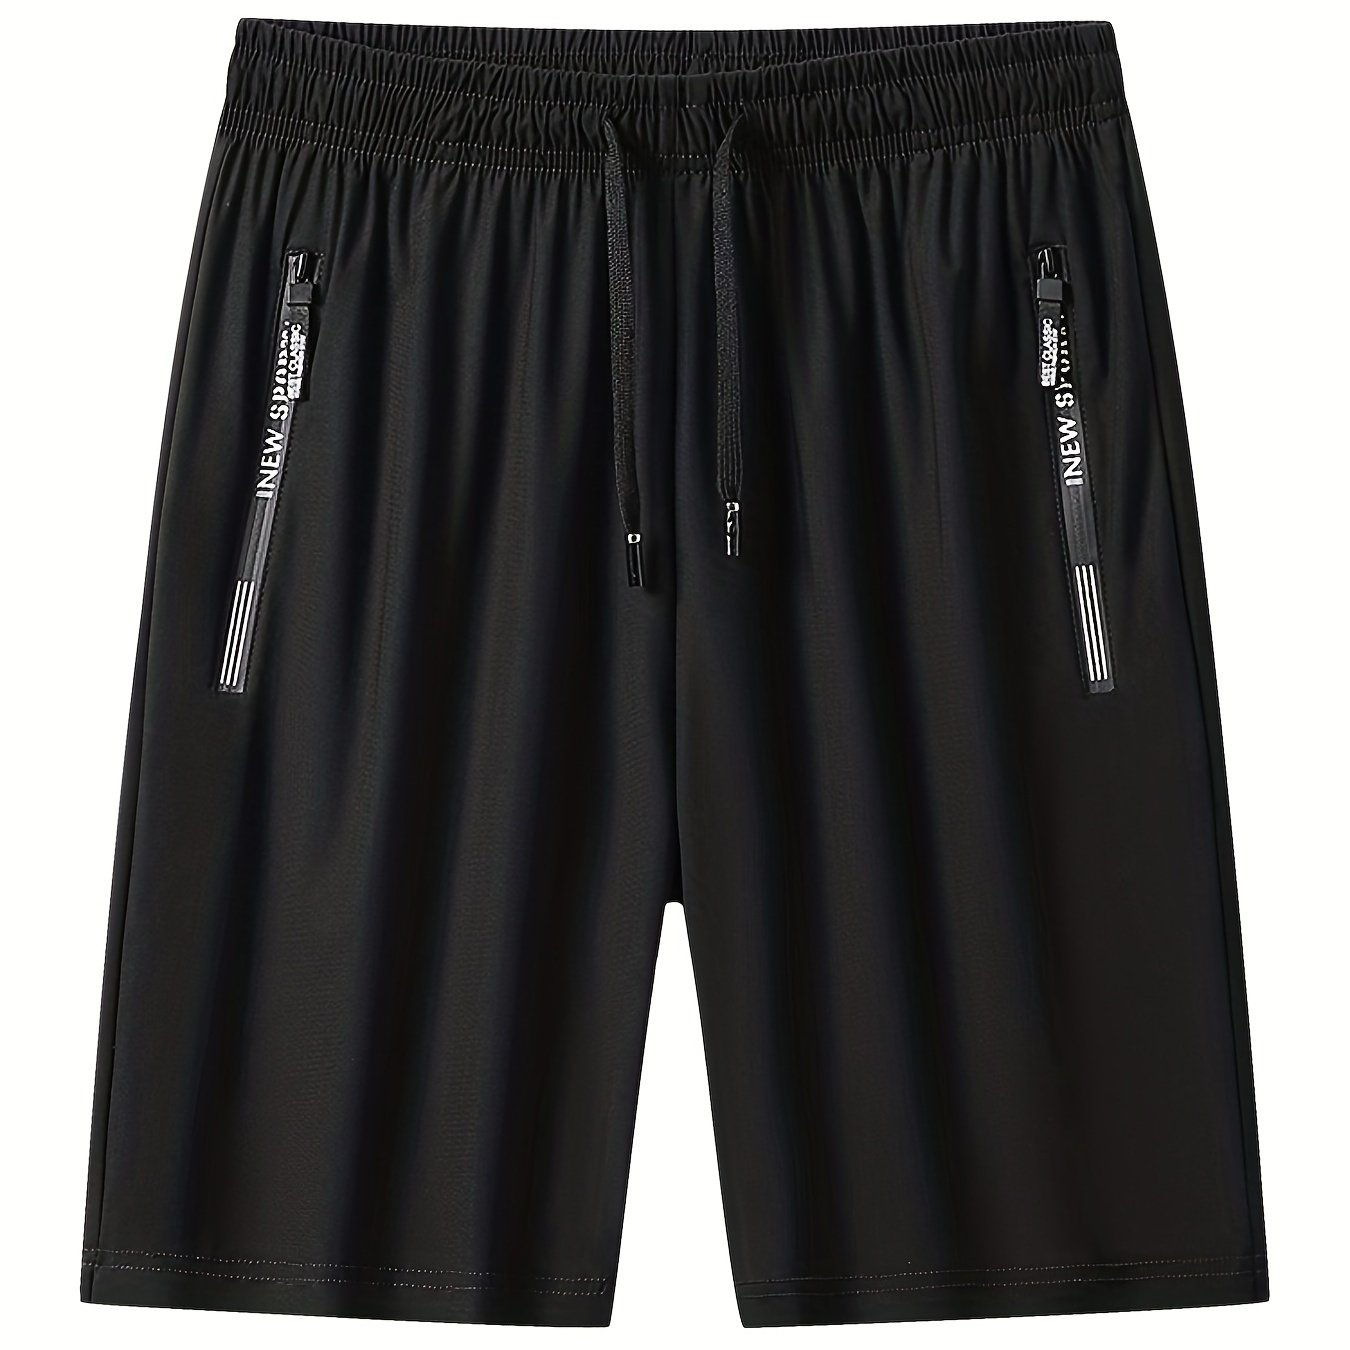 Men's Shorts: Active High Stretch Breathable Quick Moisture Wicking Drawstring Shorts With Zipper Pockets - Perfect For Summer Workouts!